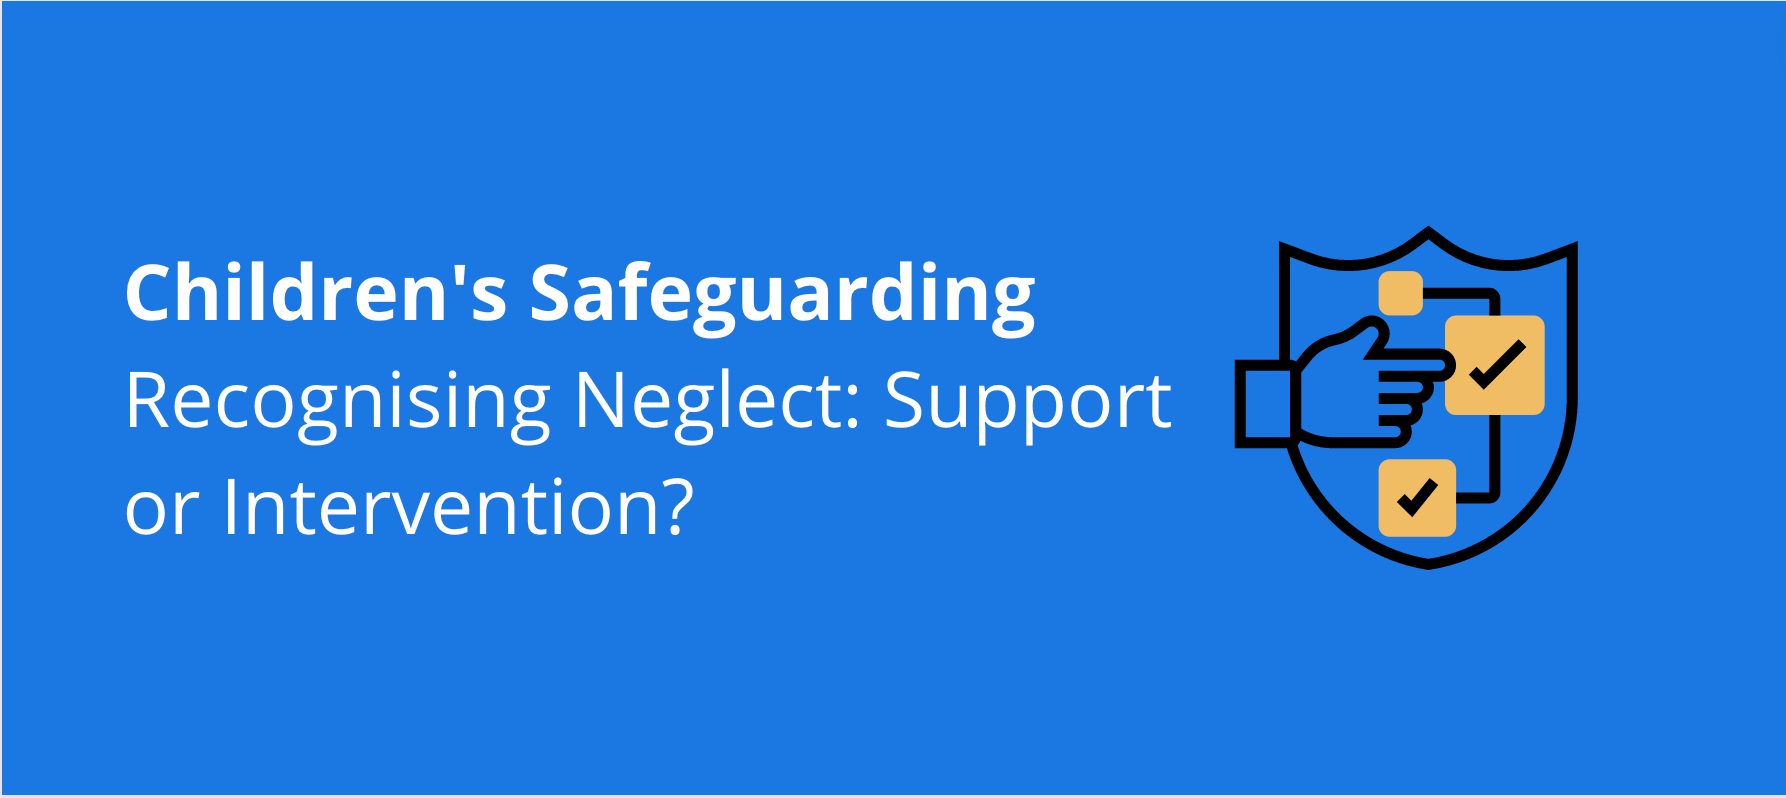 Children’s Safeguarding – Recognising Neglect: Support or Intervention?